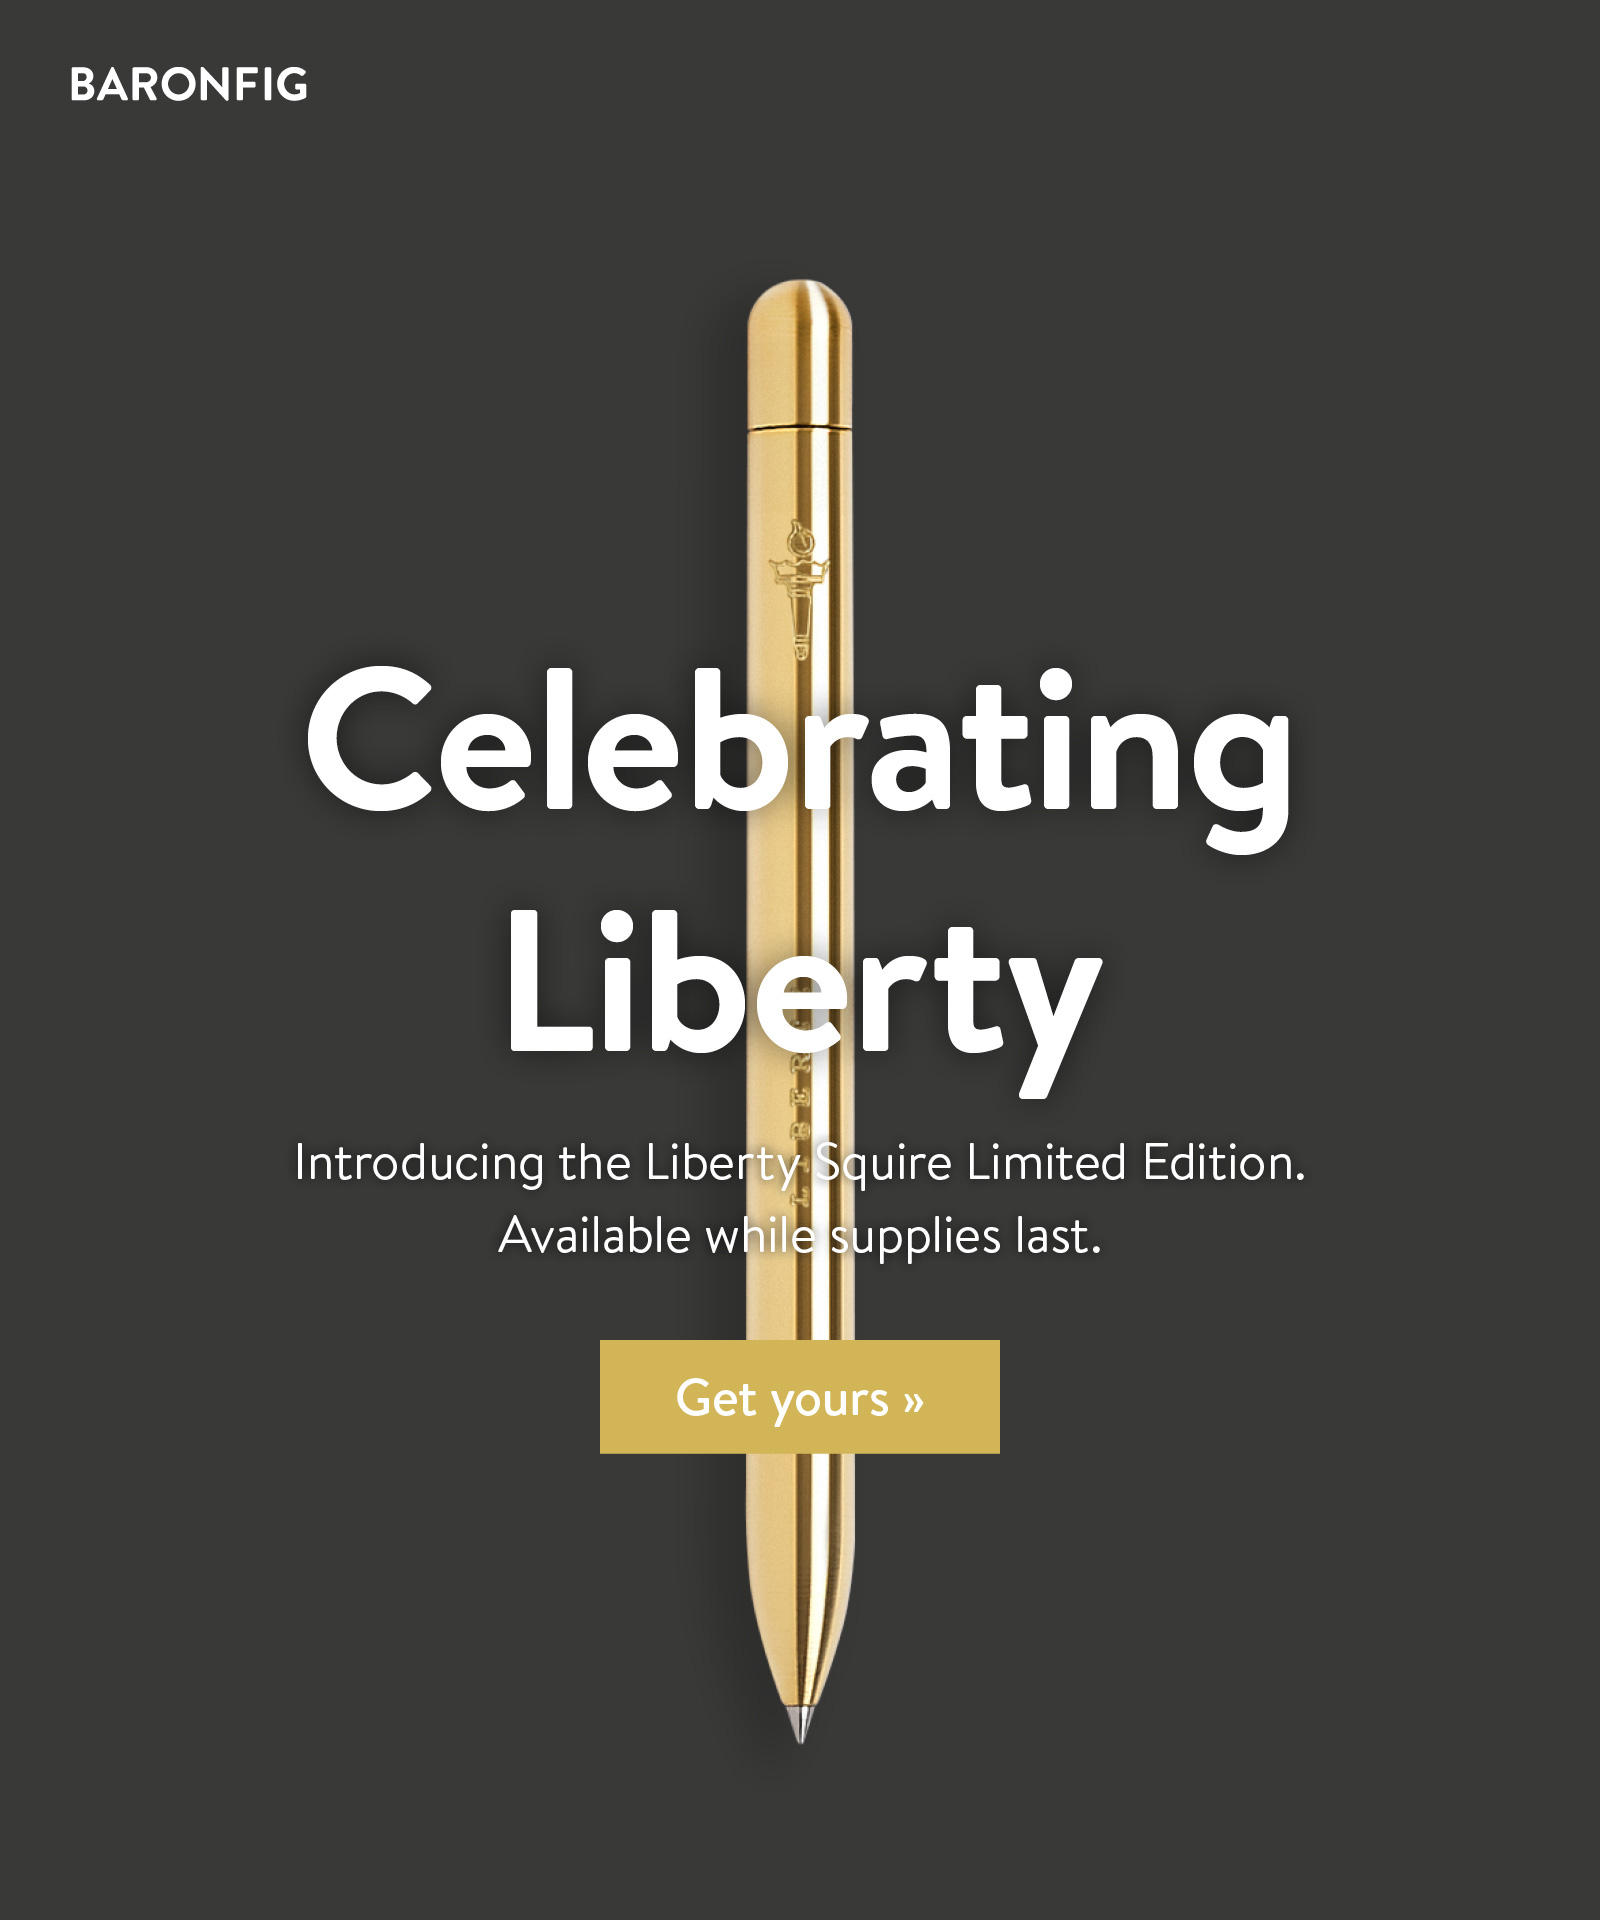 Introducing the Liberty Squire Limited Edition. Get yours ?